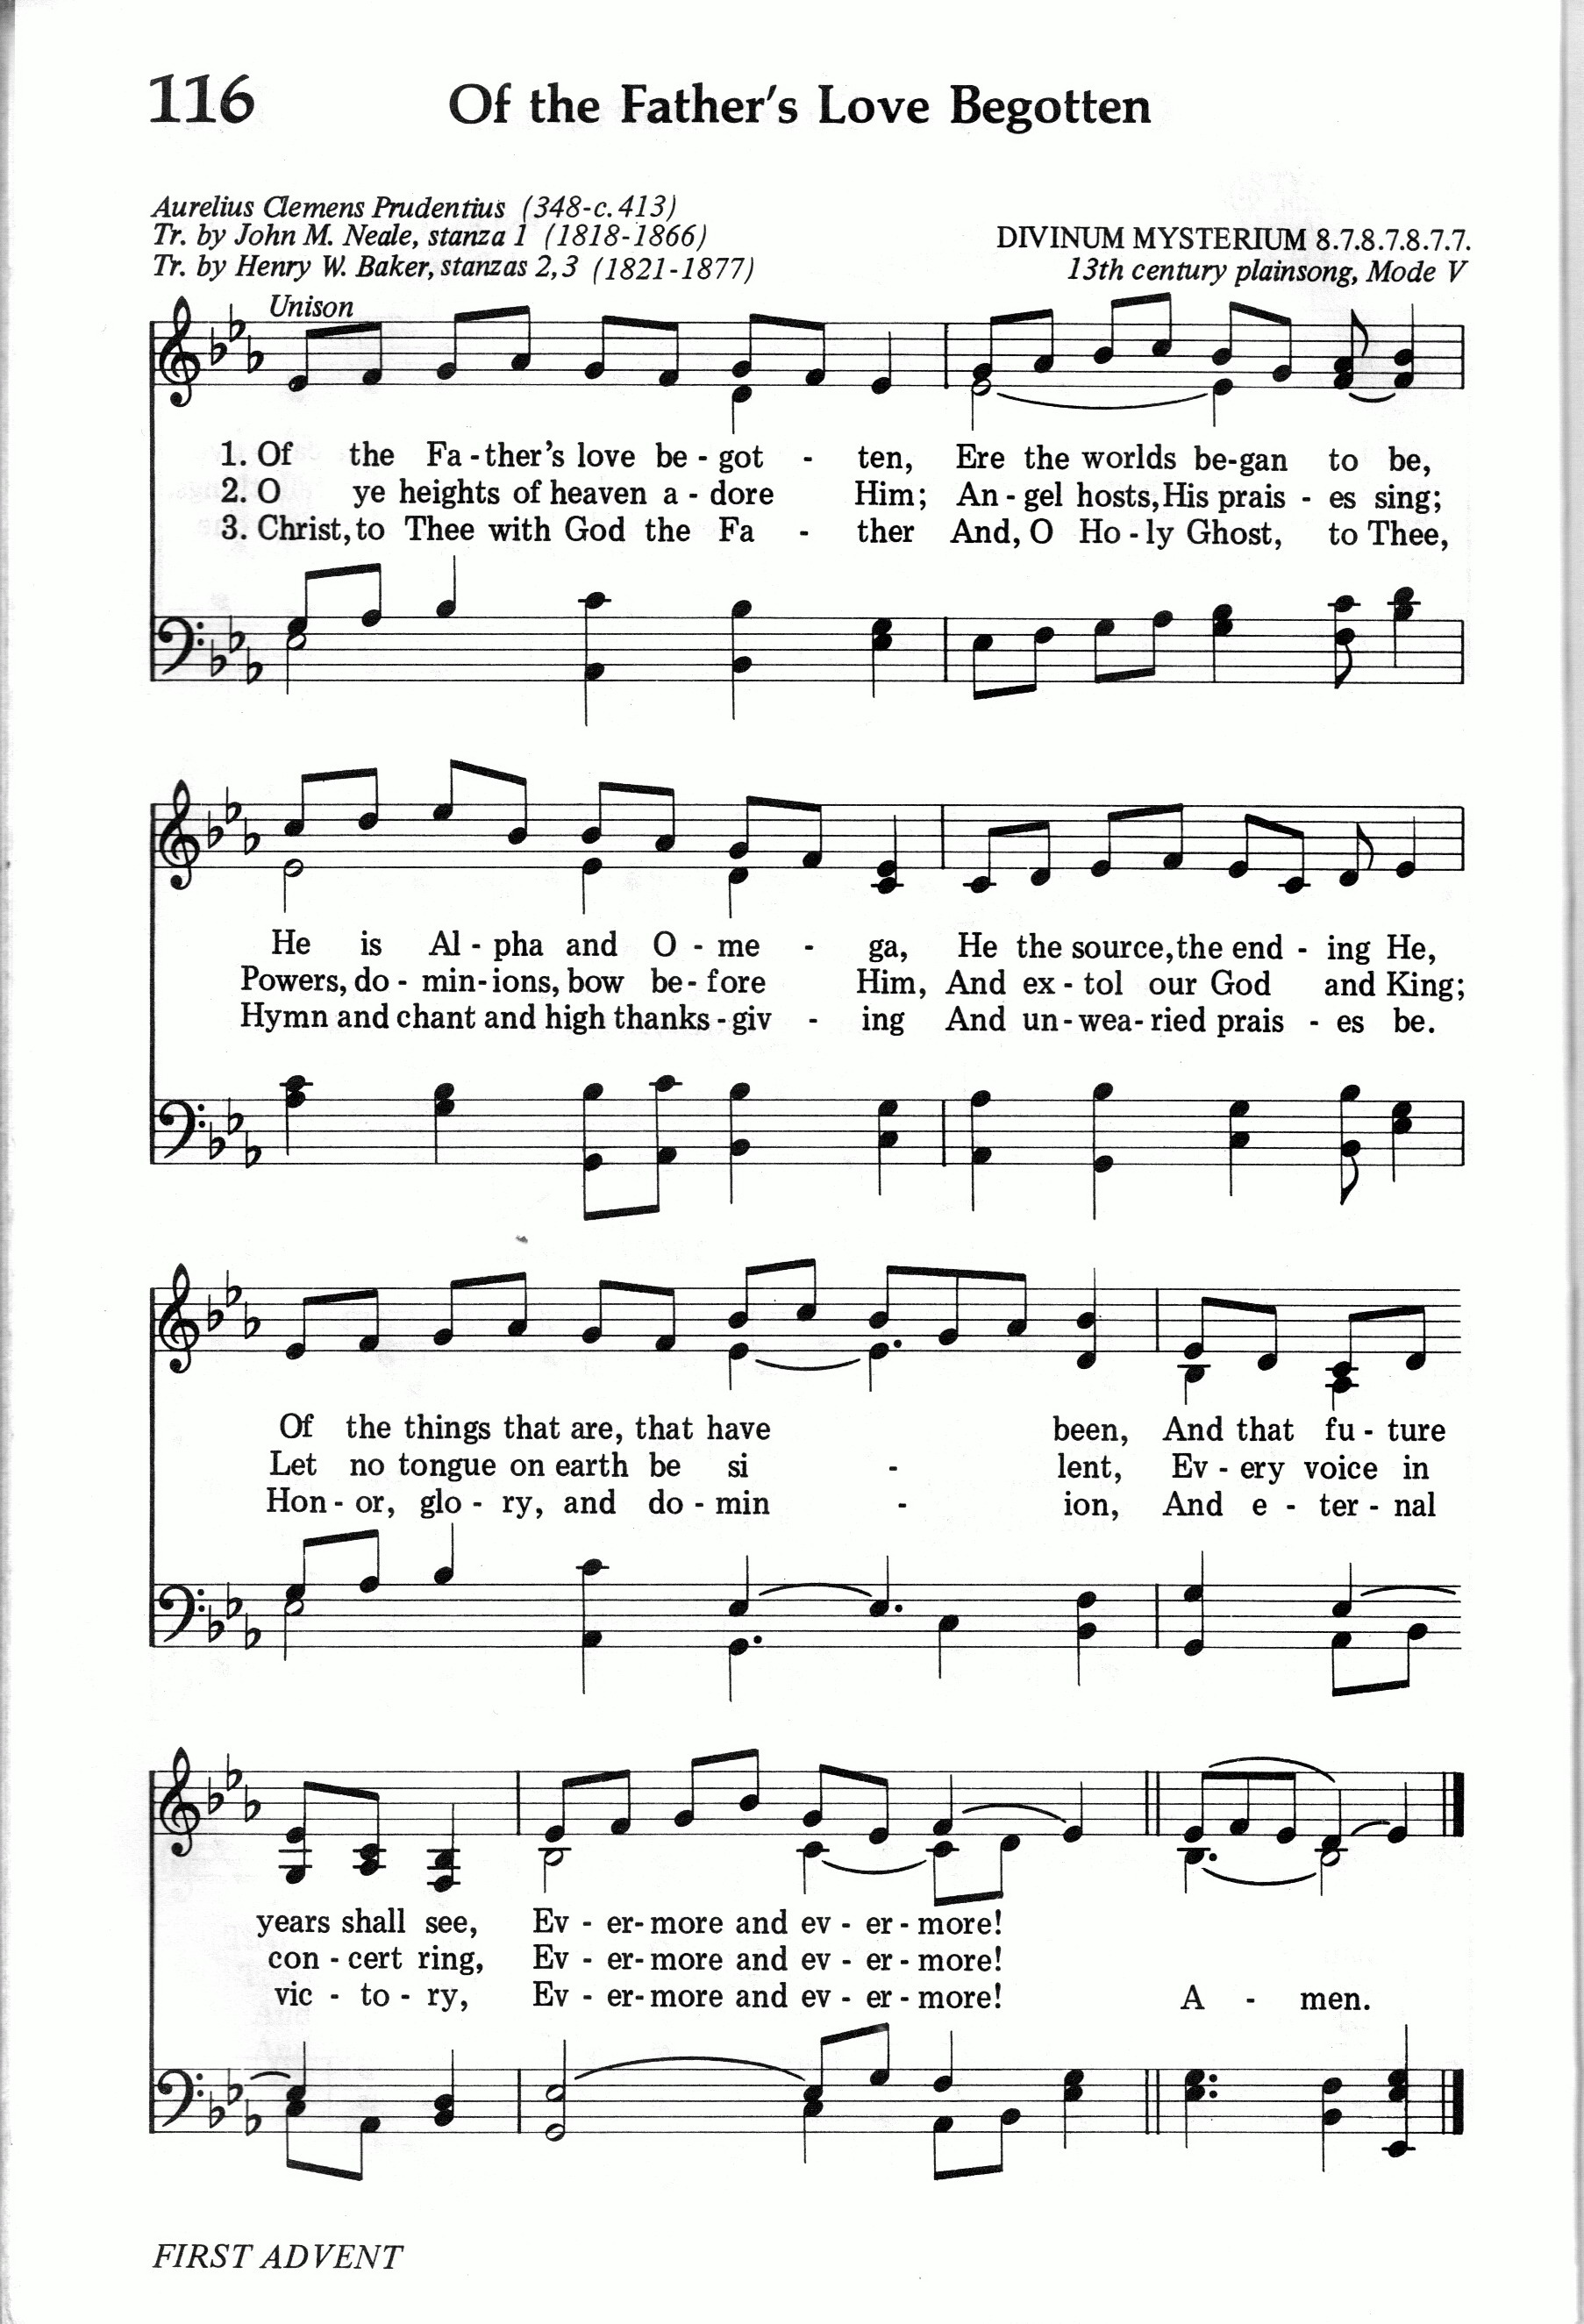 116.Of the Father's Love Begotten-695HYMN